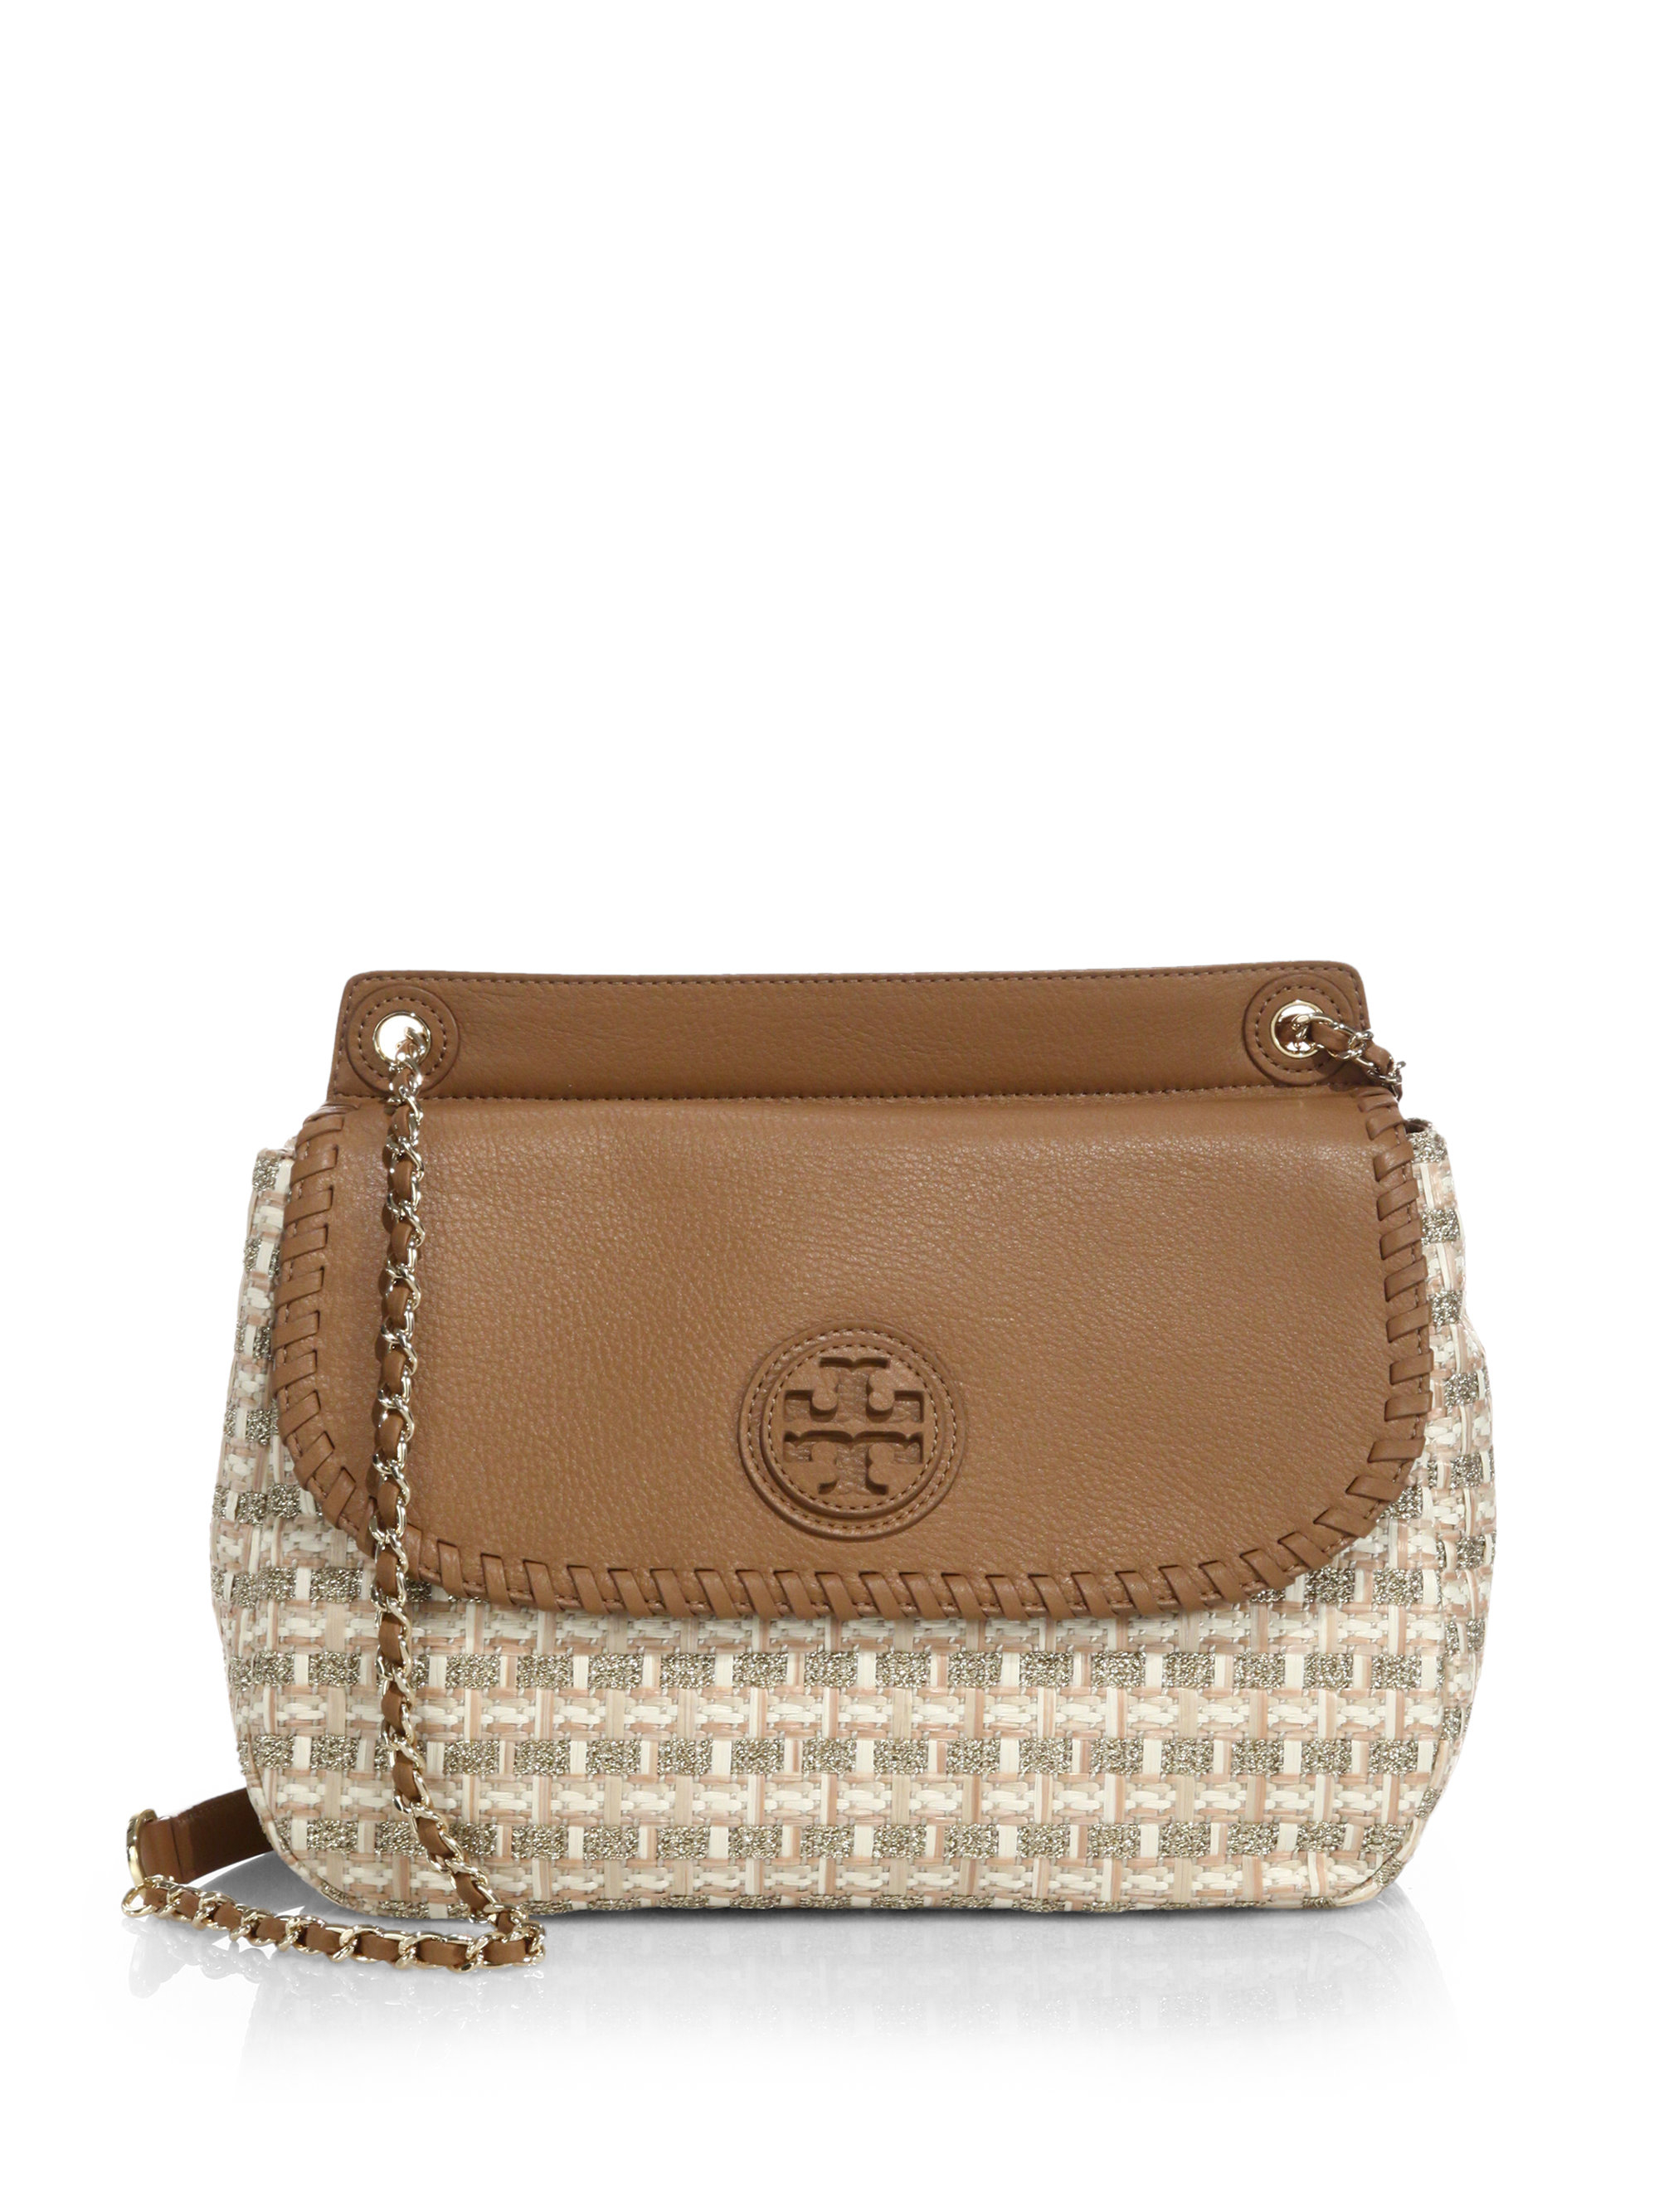 Tory Burch Marion Woven Straw Saddle Bag in Tan (Brown) - Lyst